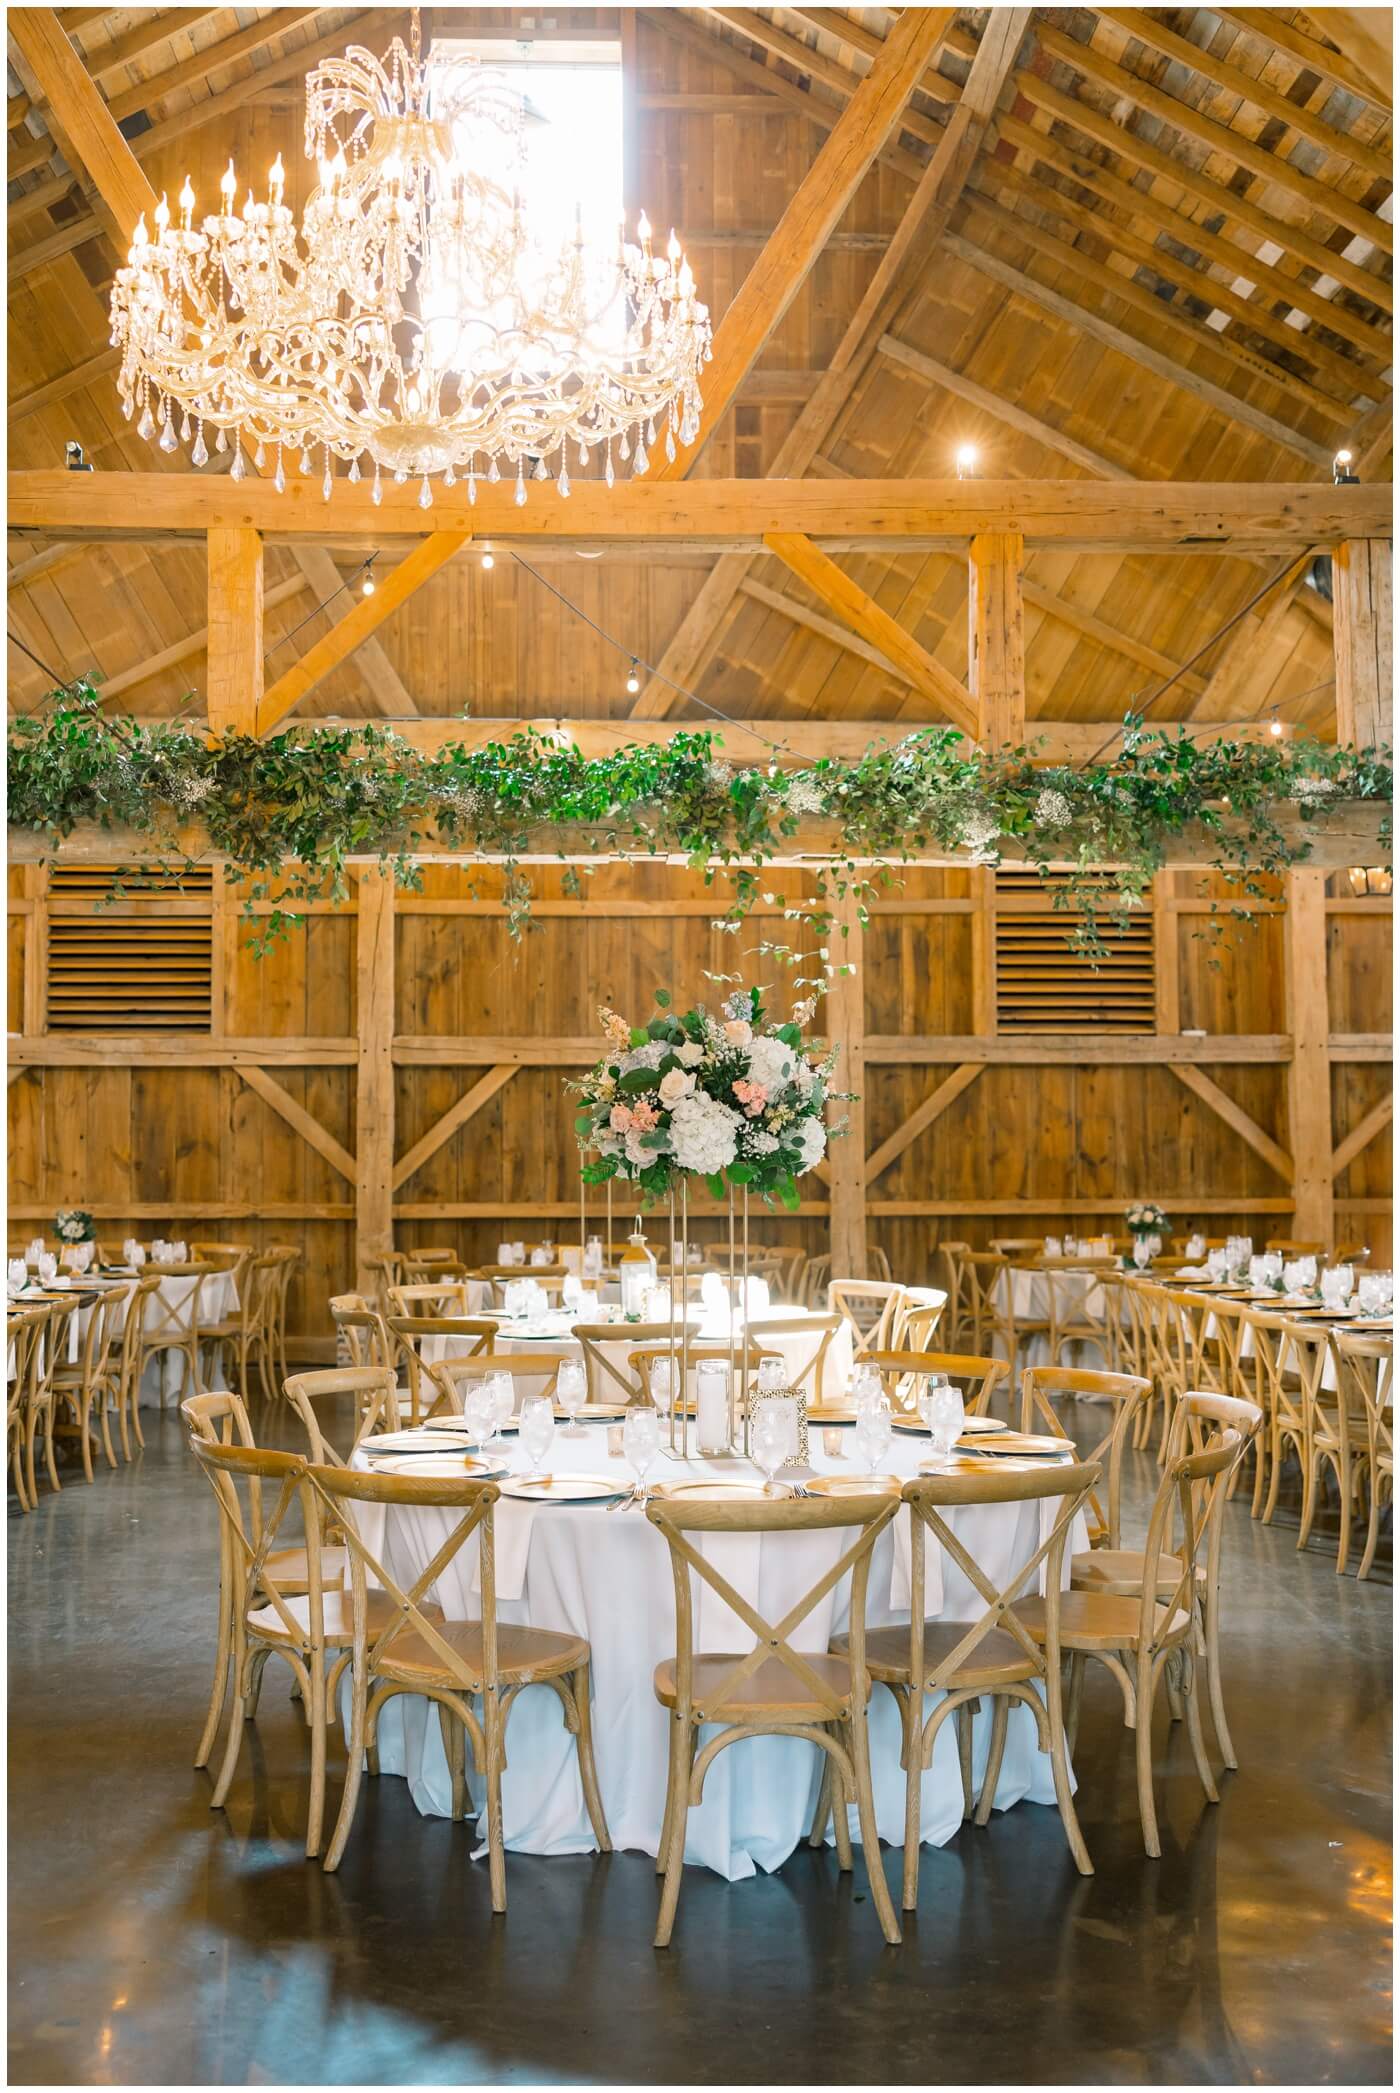 Beckendorff Farms | The reception space is beautifully prepared with flowers and greenery